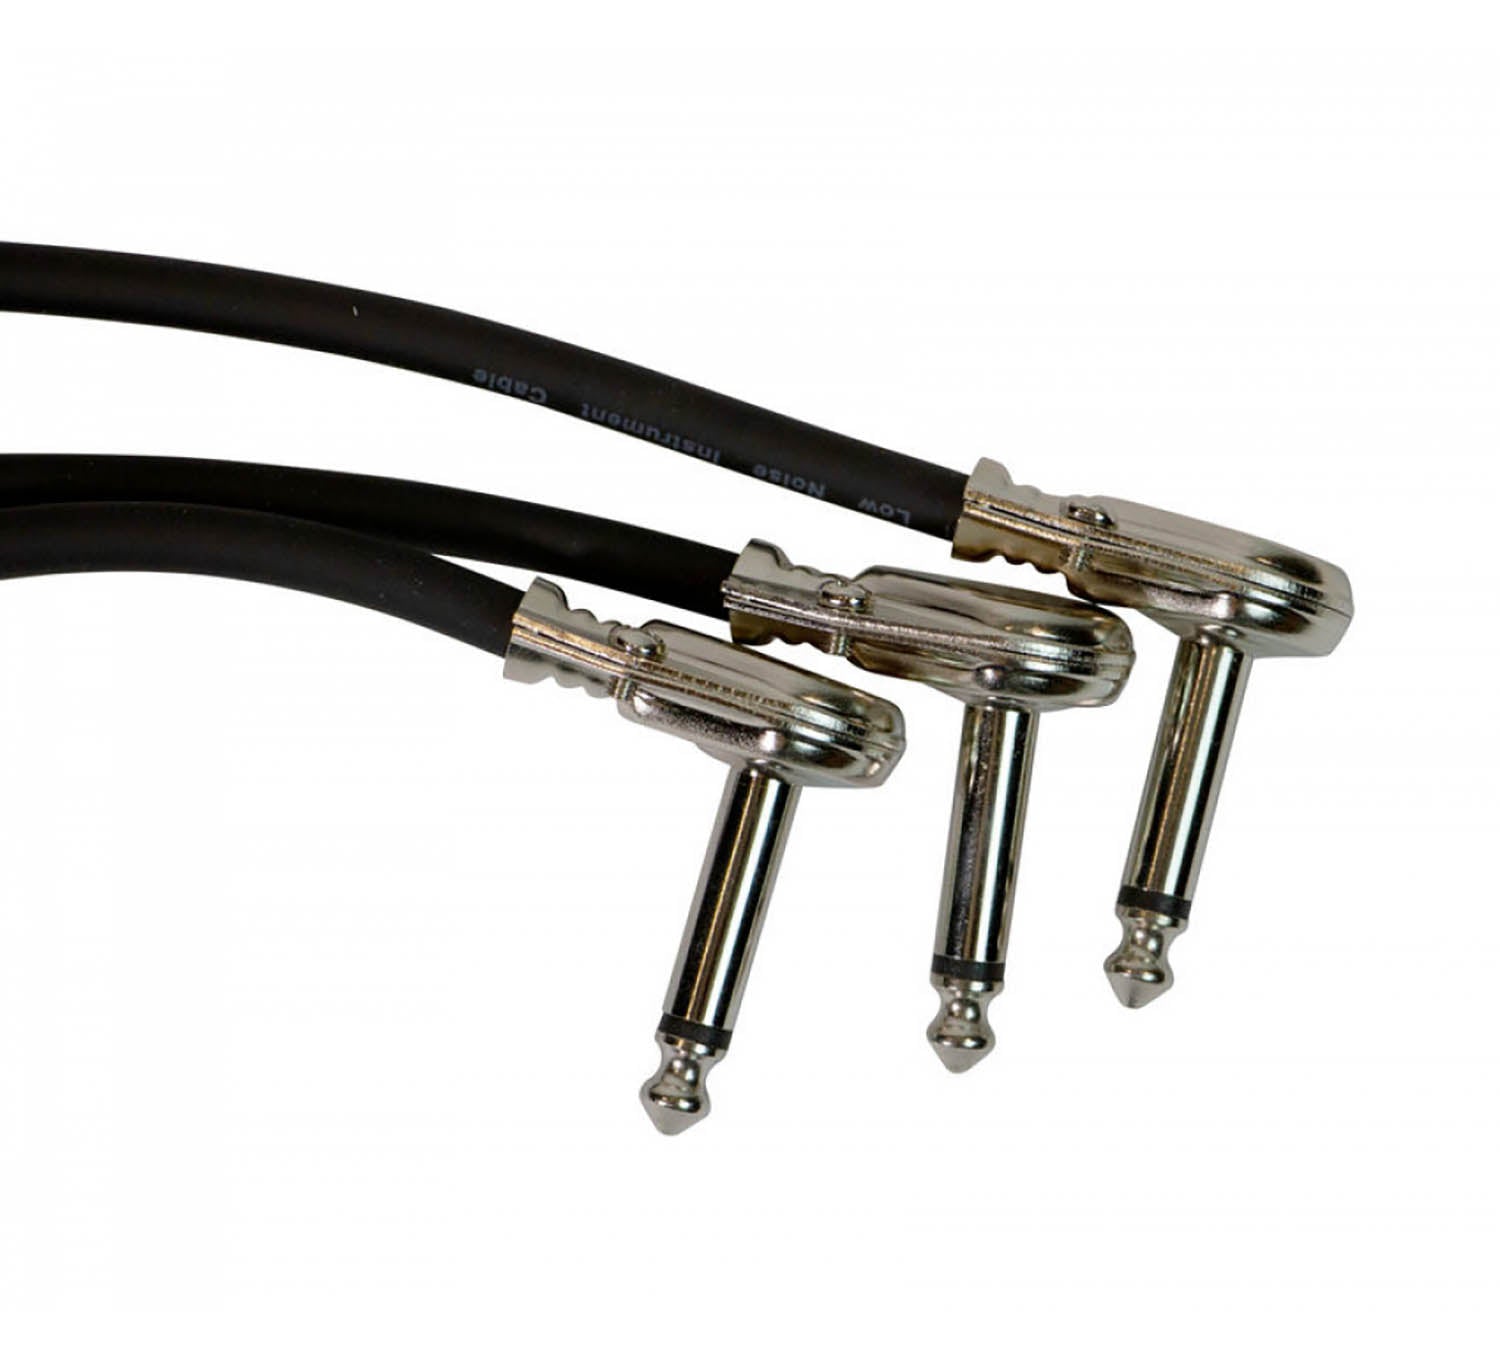 On Stage PC506B-3PK, 6" Patch Cable with Pancake Connectors in Black - 3 Pack - Hollywood DJ